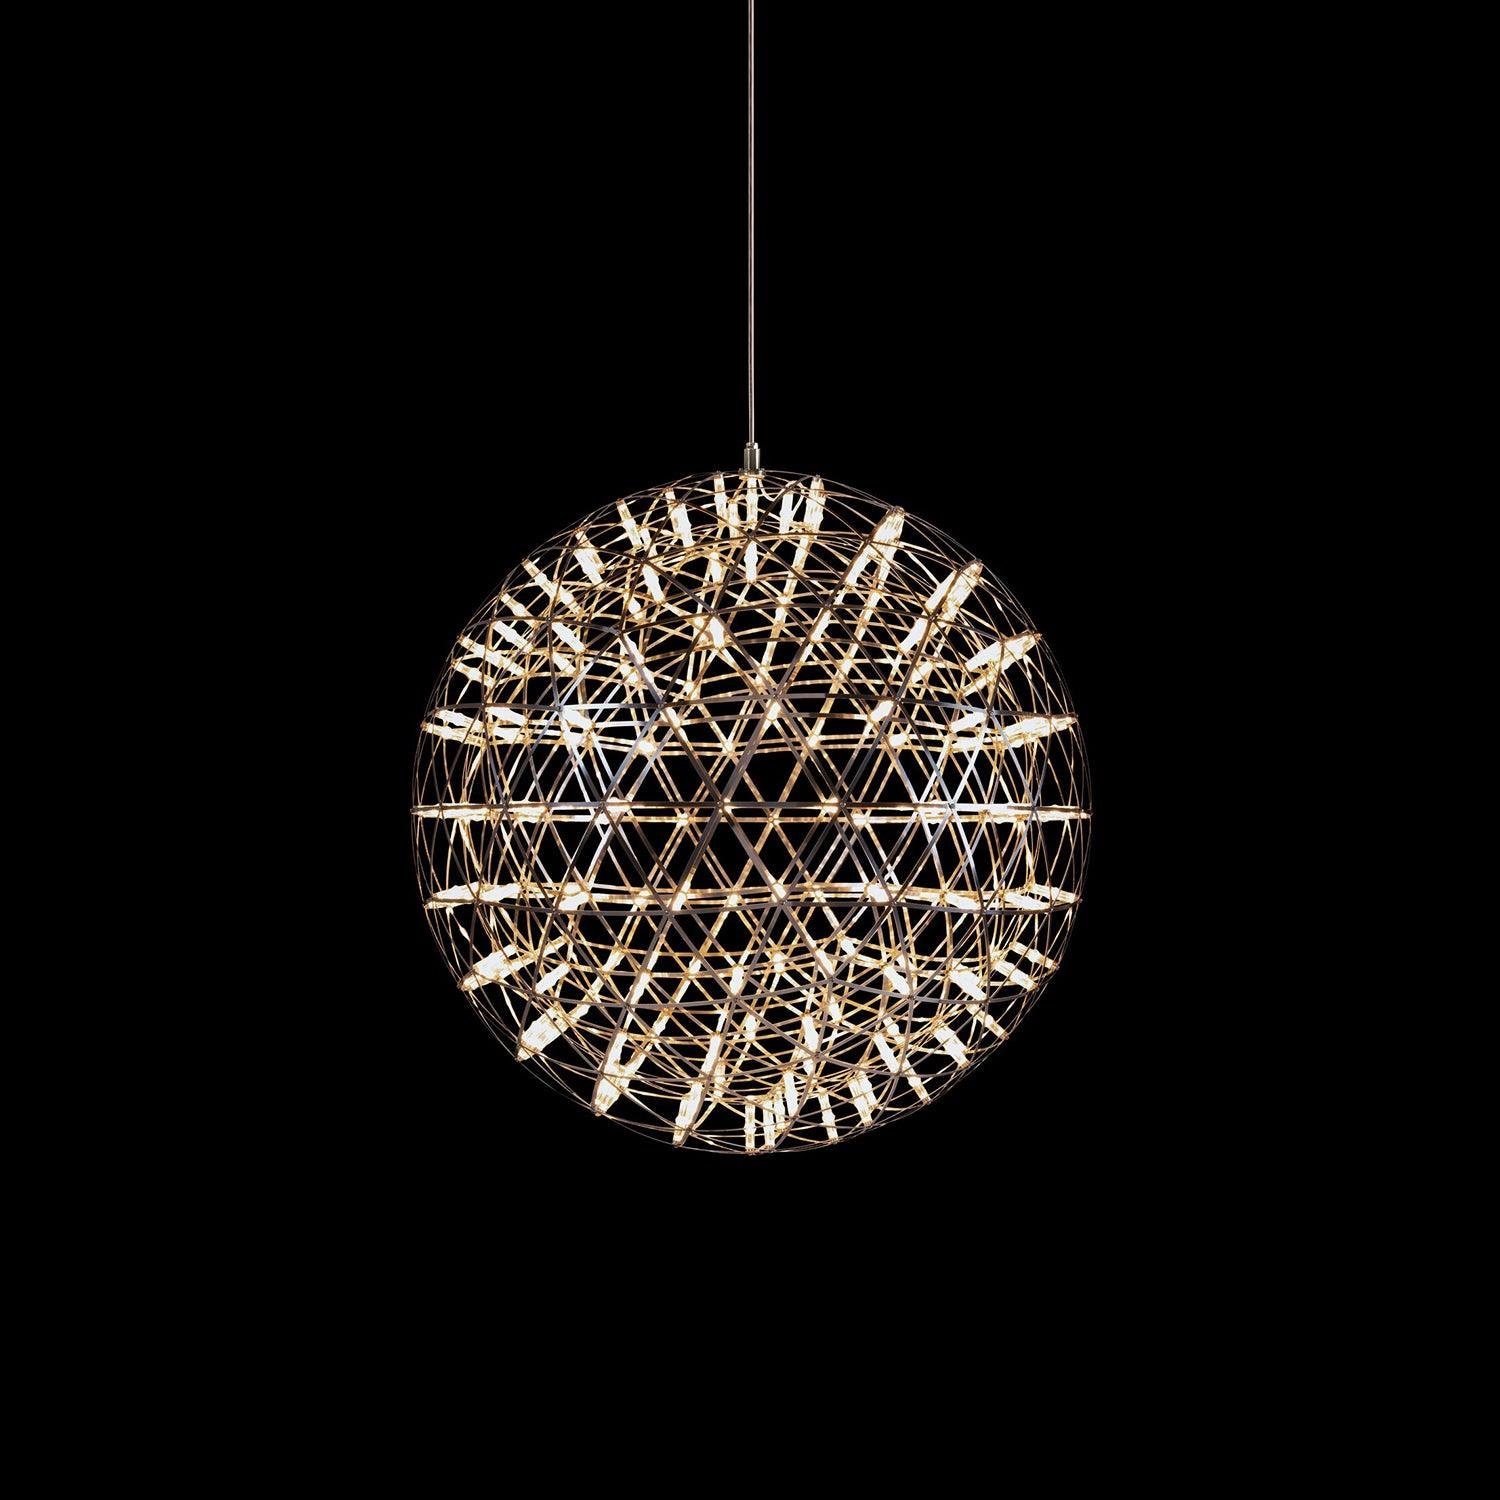 Cool White 92-Head Spark Ball Pendant Light with a Diameter of 80cm